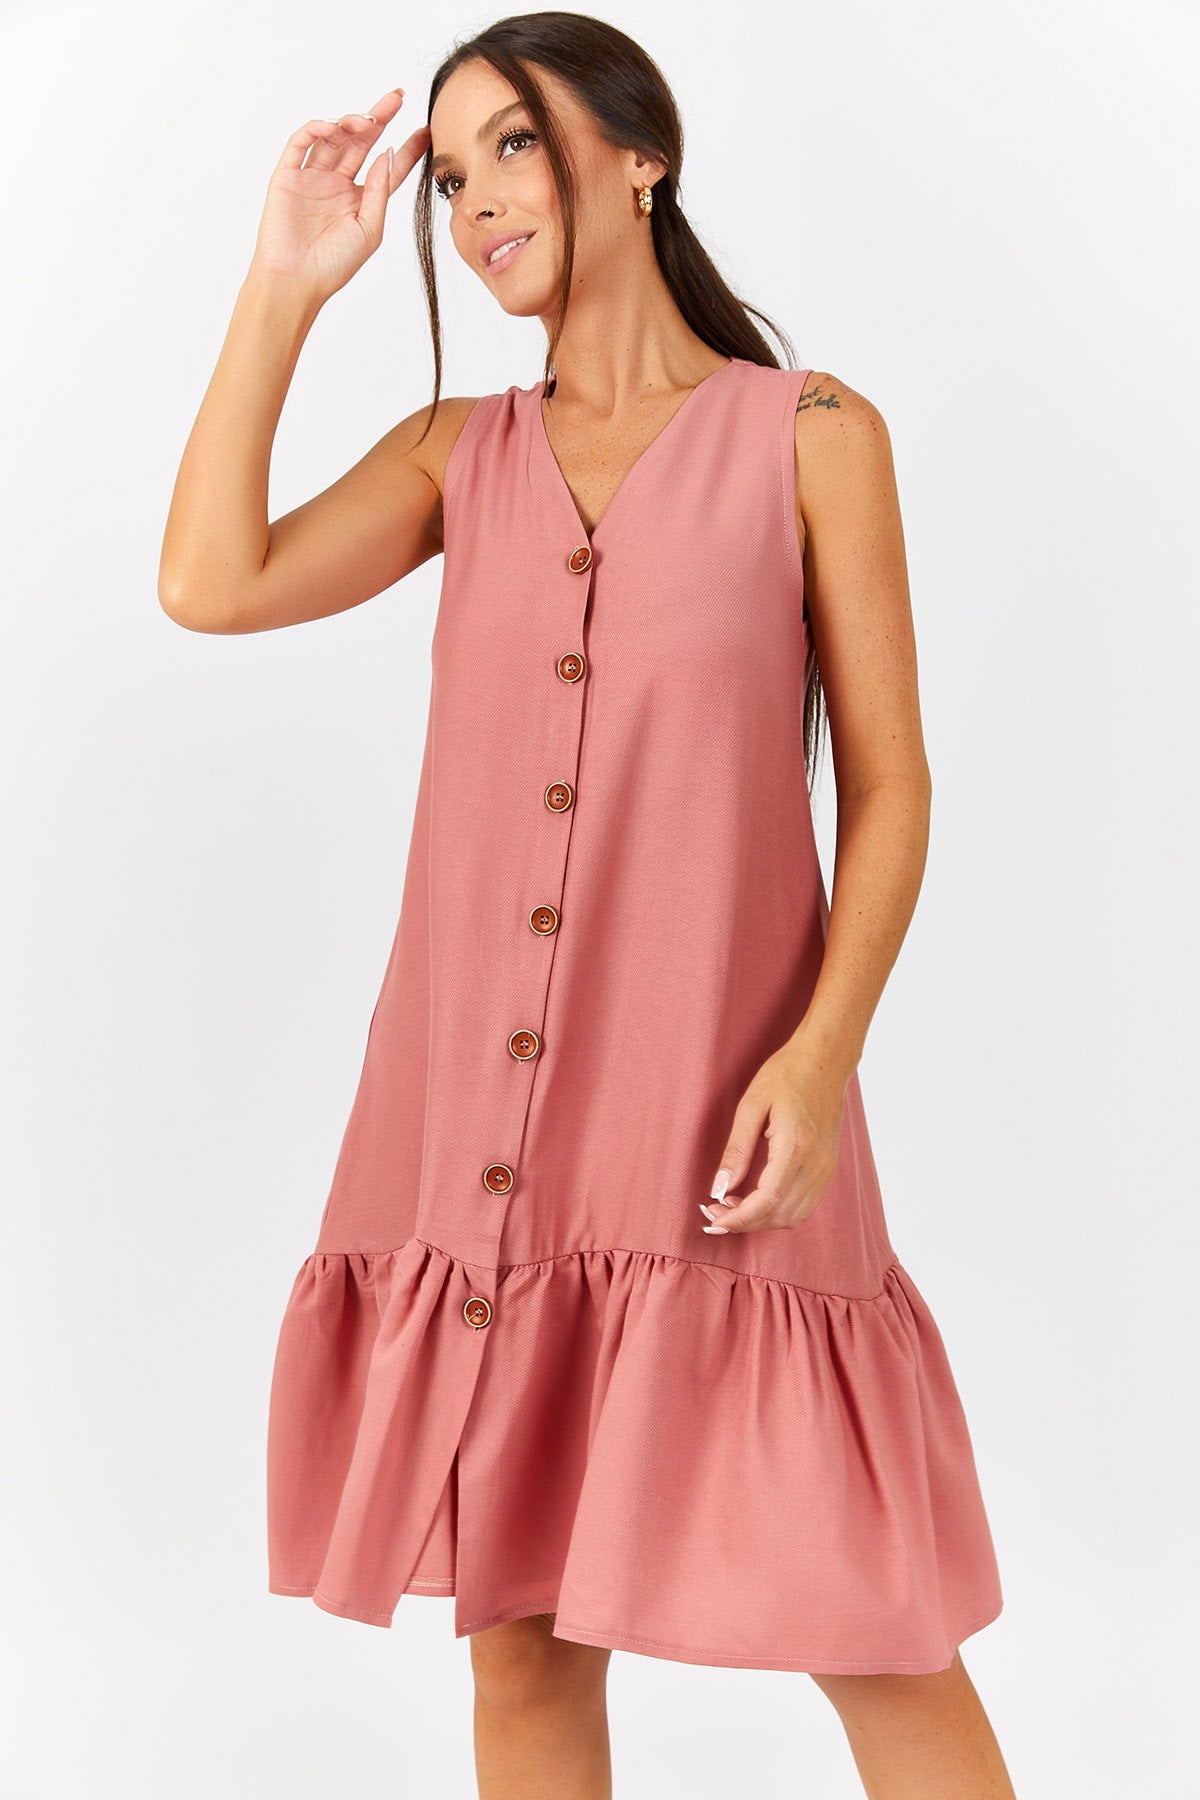 WOMEN'S ROSE DRIVER SPEP RISKED front buttoned sleeveless dress ARM-221153